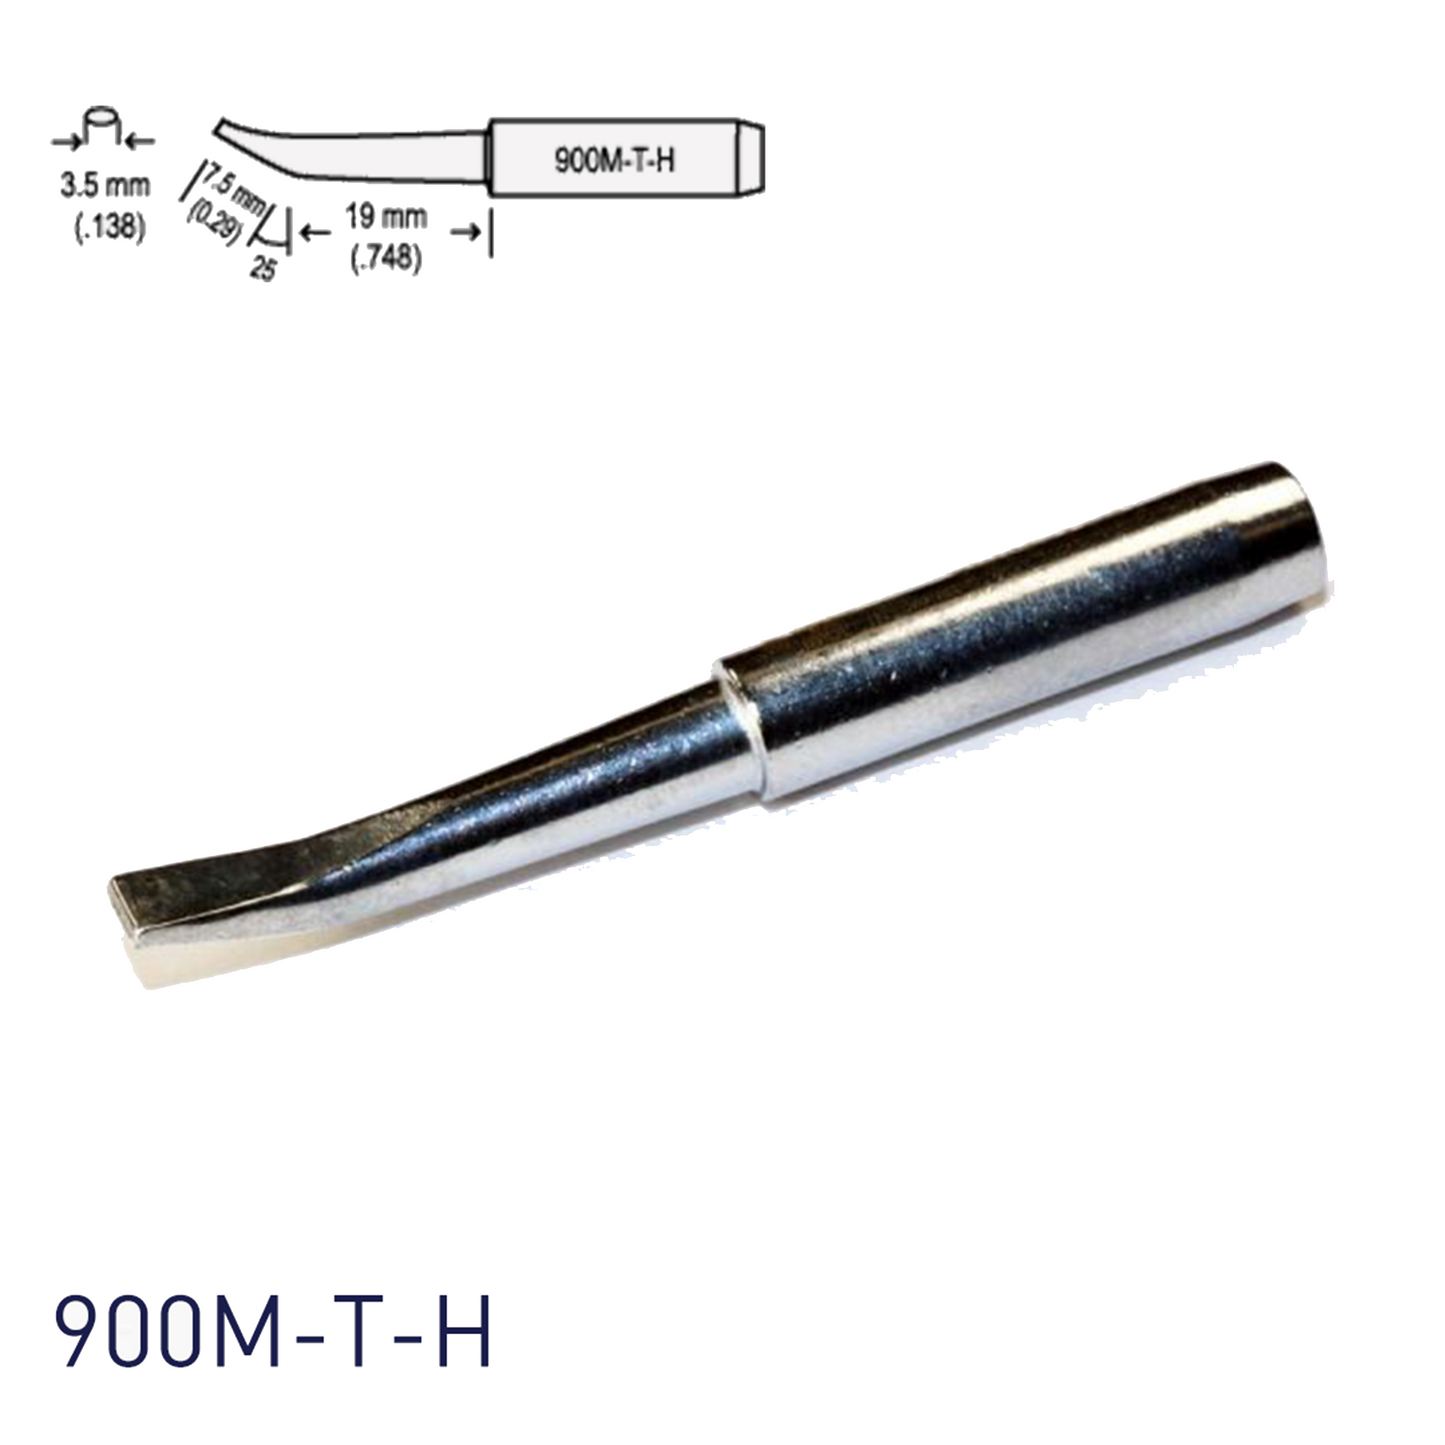 Hakko 900M-T-H Soldering Iron Tips for soldering station 928, 937, 701, 702B, 936, 933/934 and handpieces 900M(ESD), 907 and 933